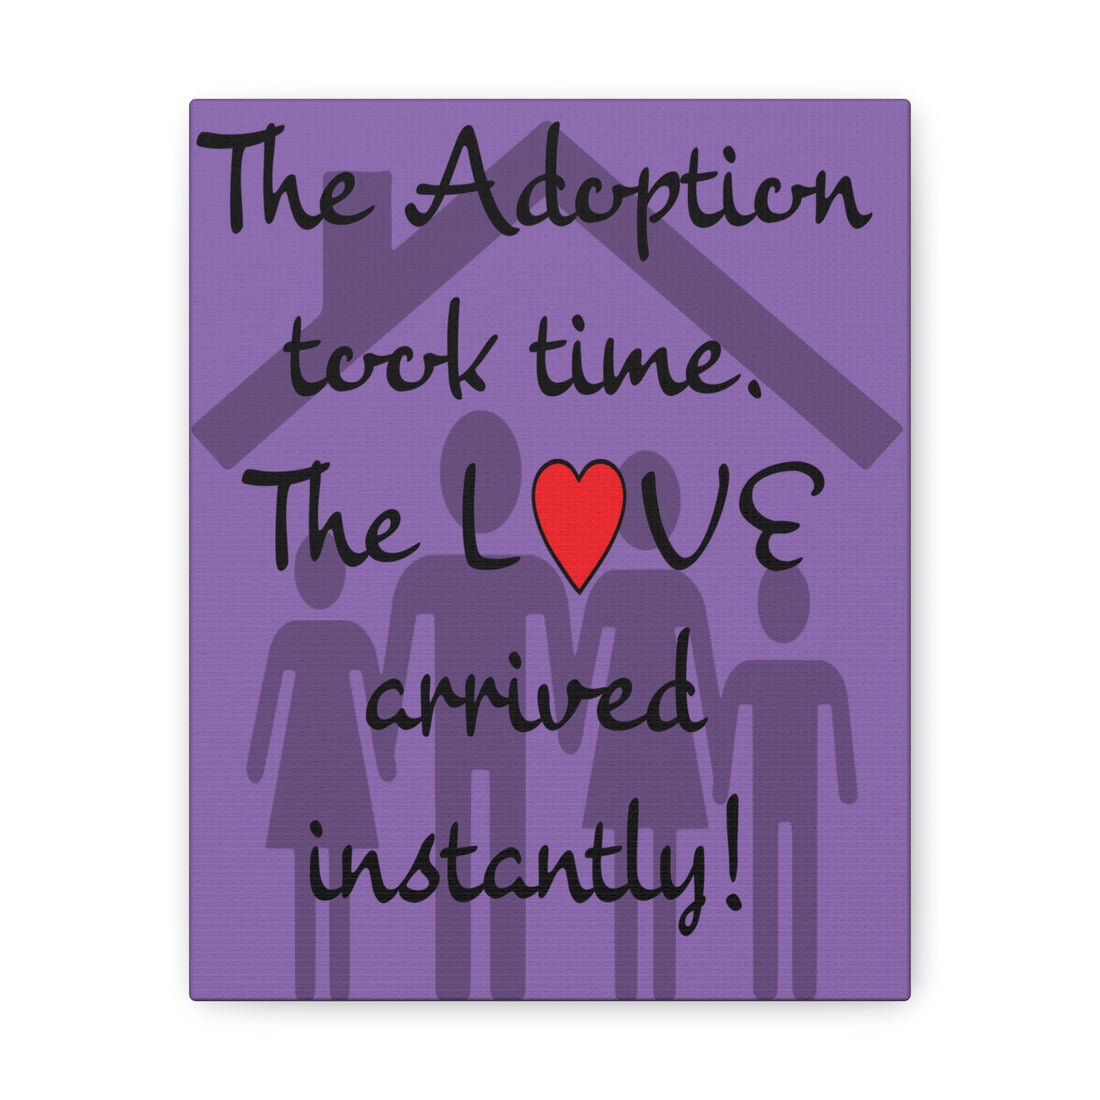 Adoption took time but Love came instantly - Canvas